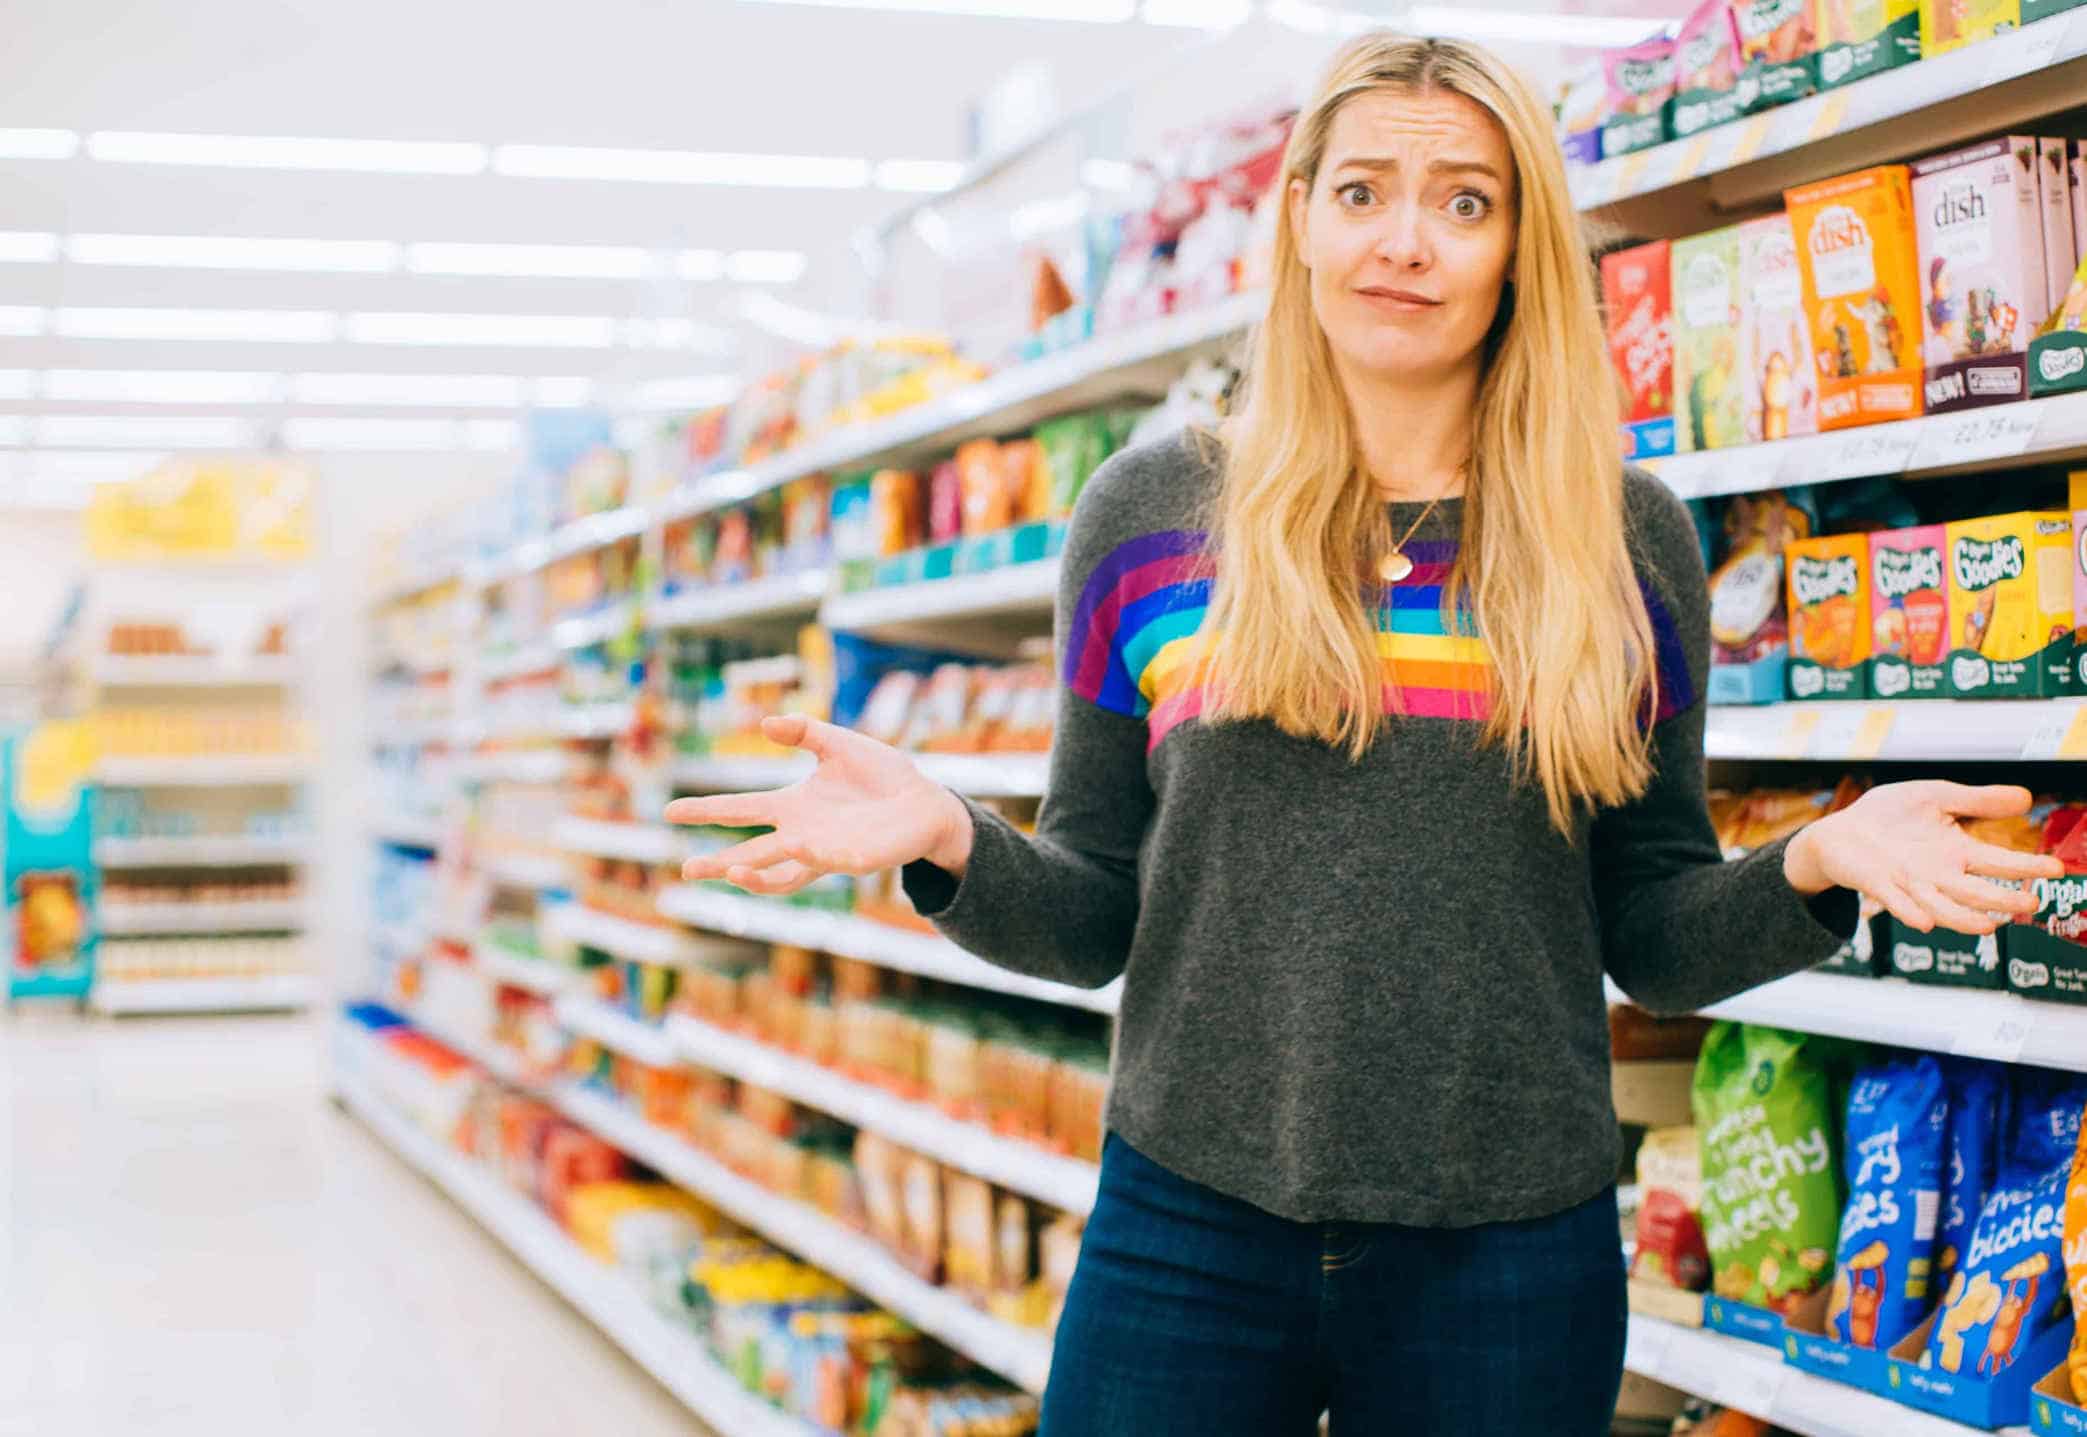 White person with long blonde hair stands in front of a supermarket aisle with a puzzled look on their face.